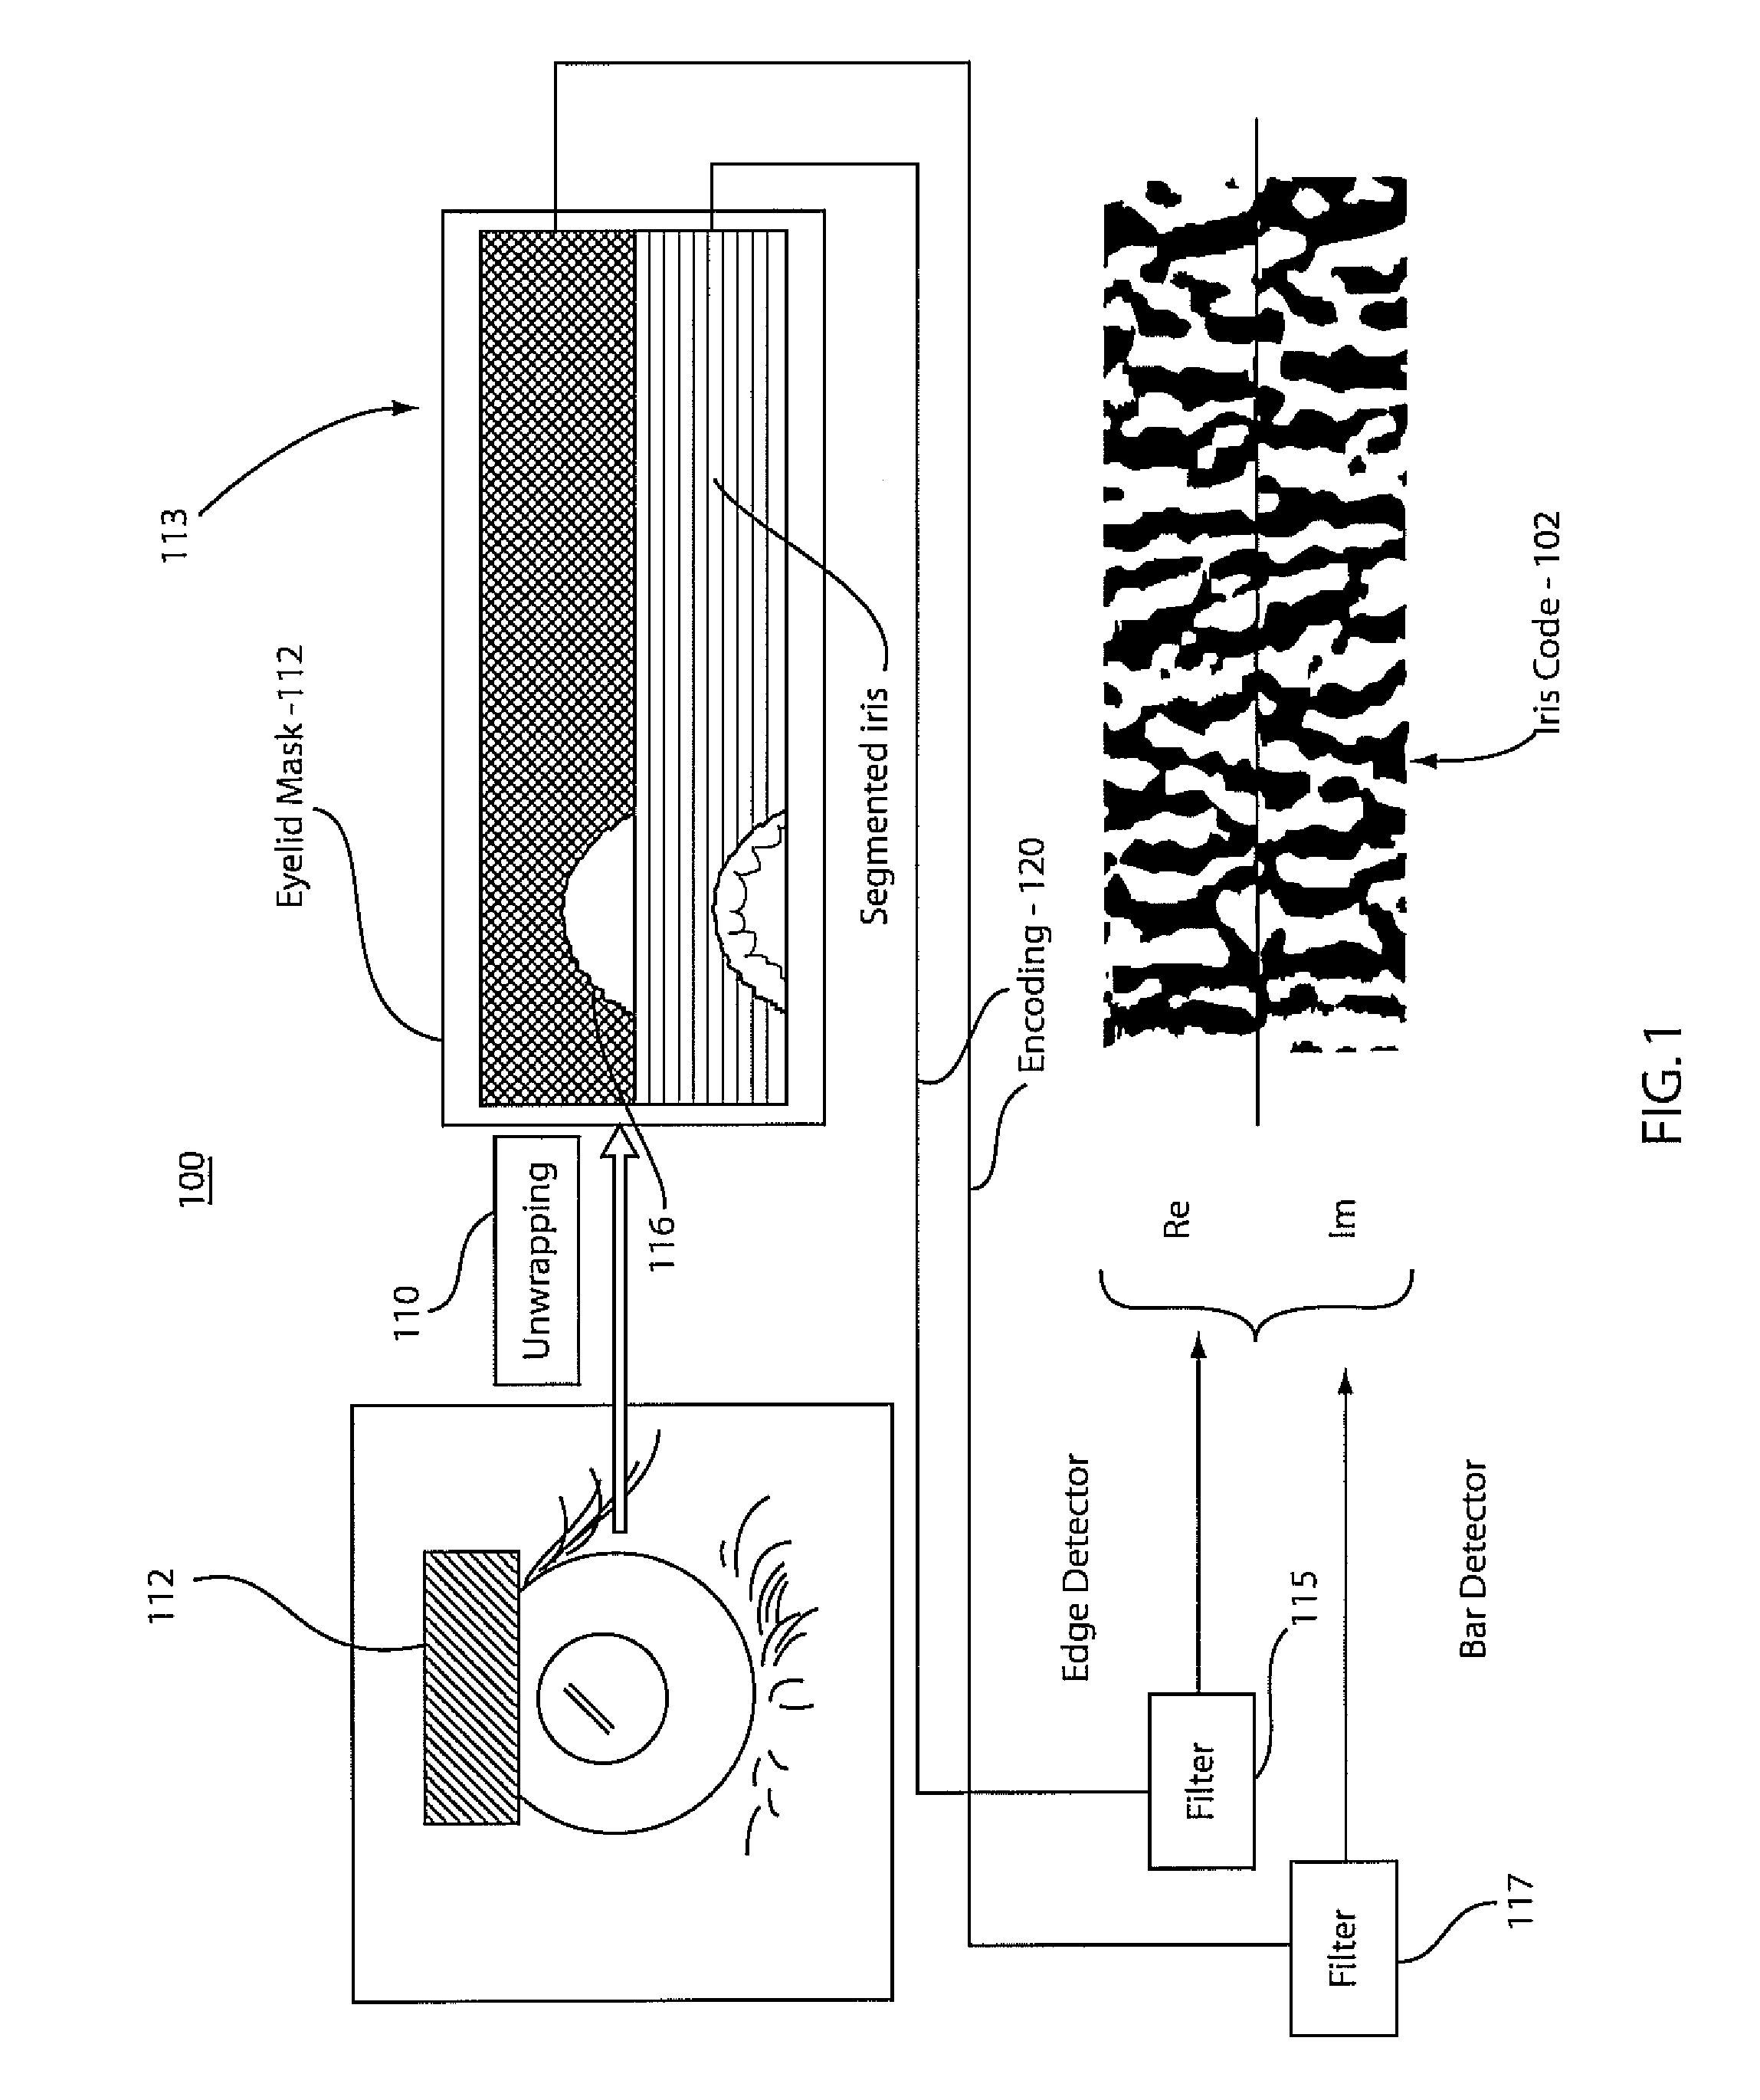 Iris recognition system and method